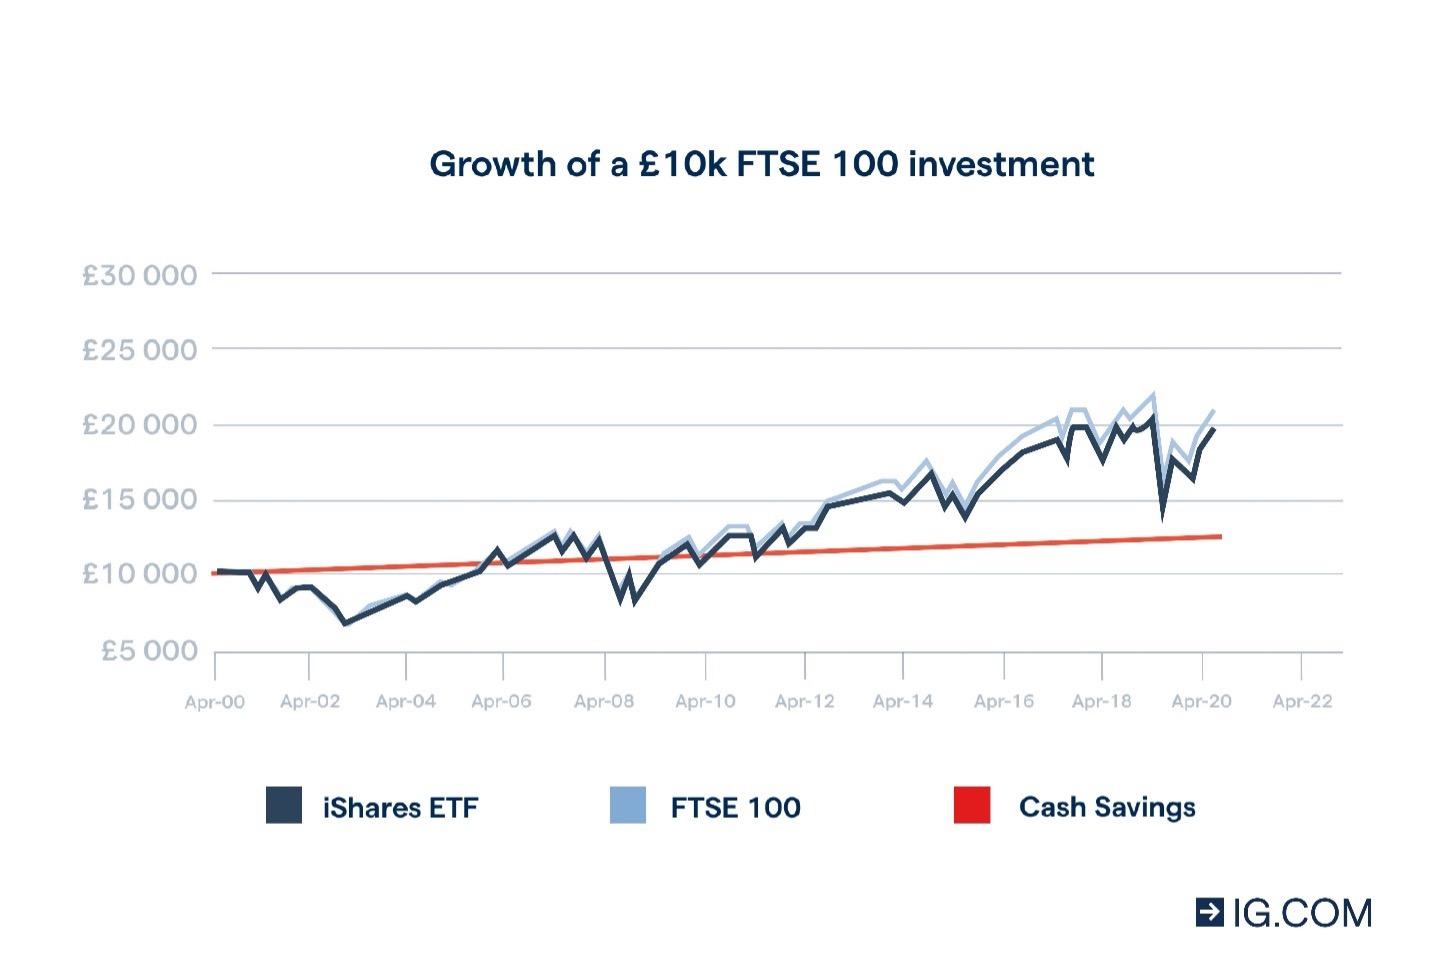 FTSE 100 investing: shares